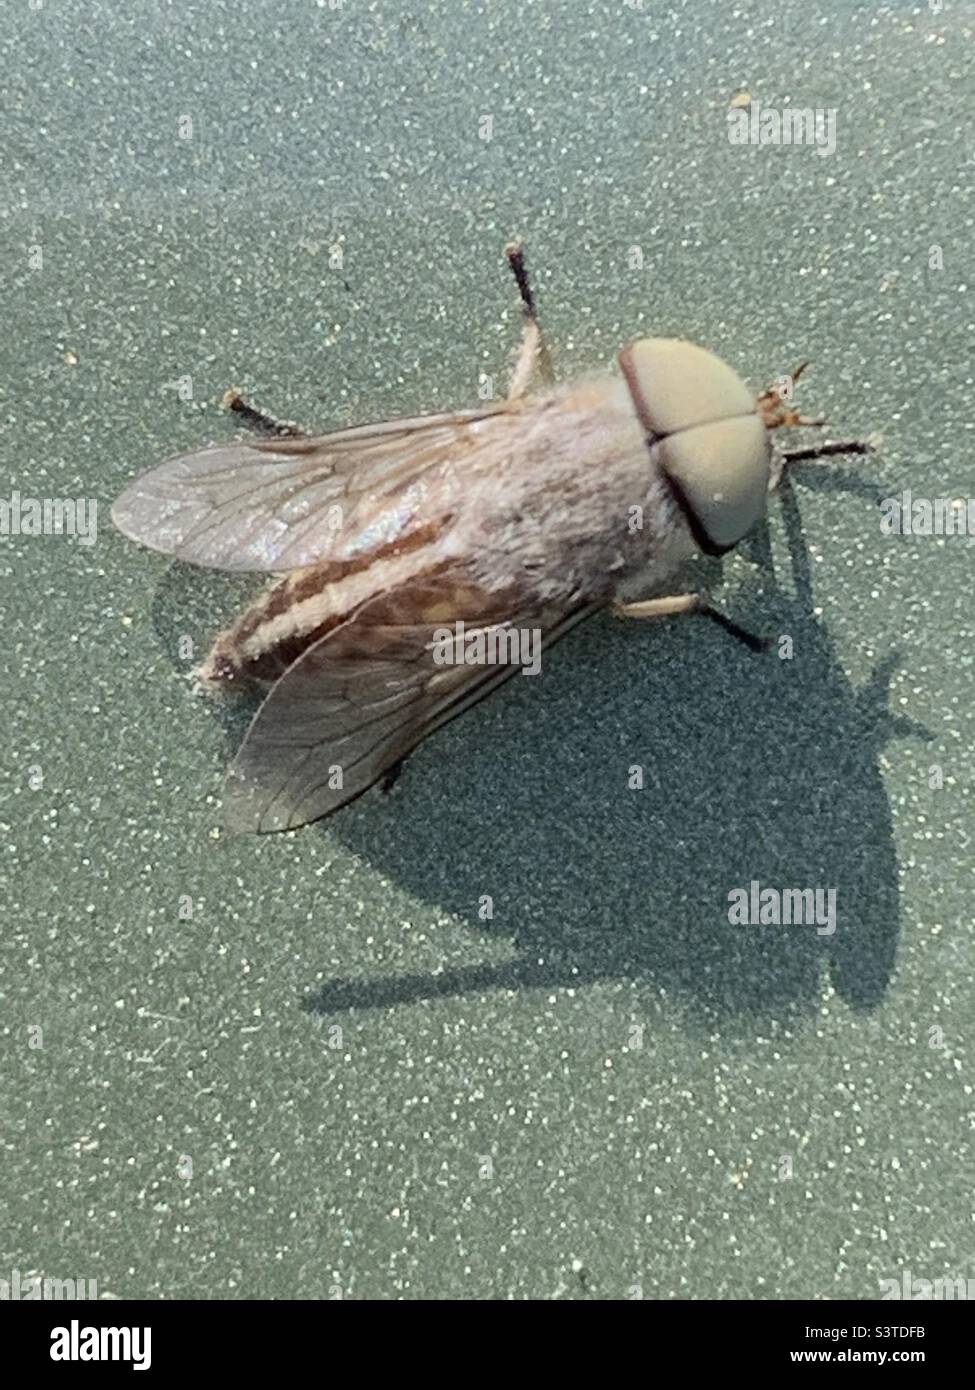 Picture of a HorseFly yo be used in Nature book, Entomology book, publication, etc. Stock Photo